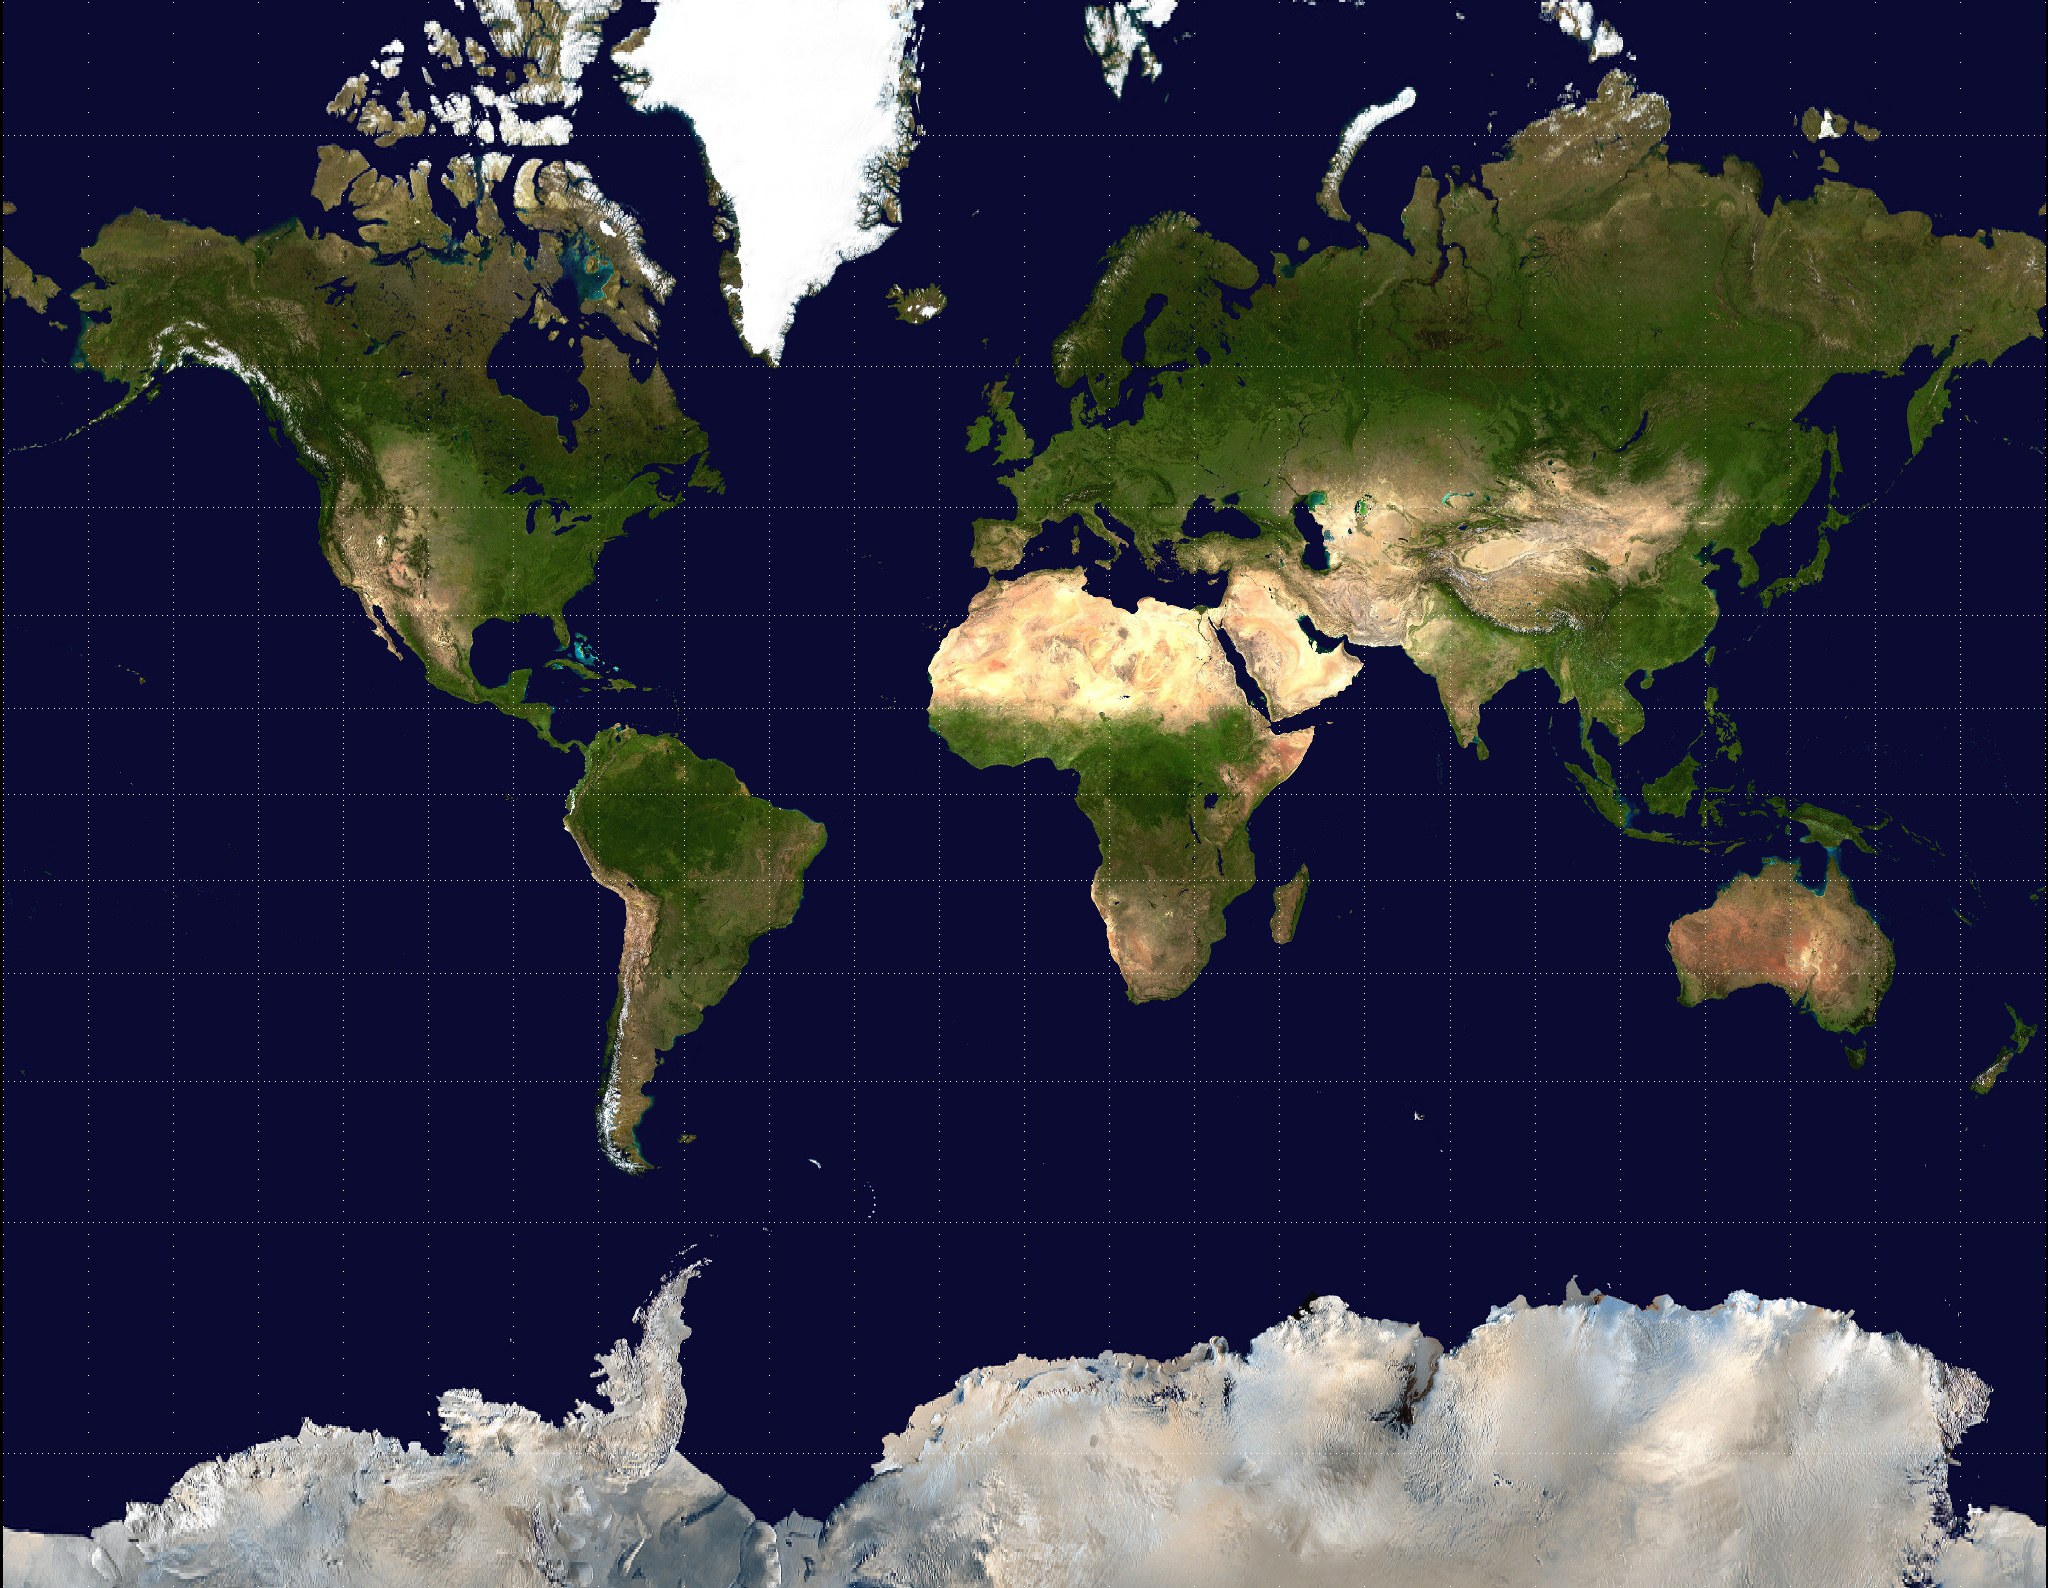 World Map Satellite Imagery Earth Png 1920x1080px World Atlas